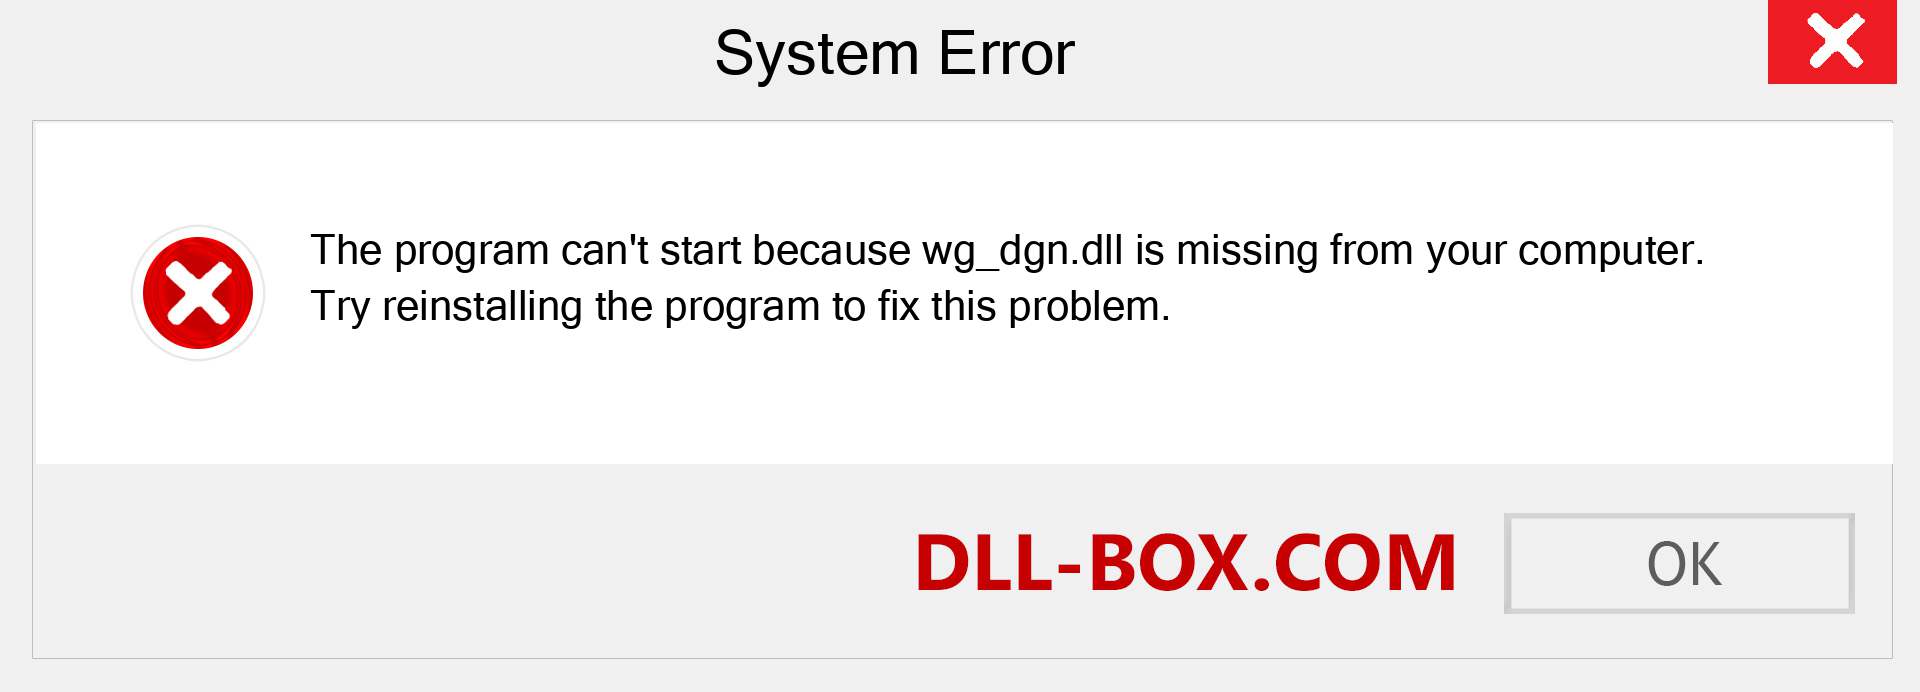  wg_dgn.dll file is missing?. Download for Windows 7, 8, 10 - Fix  wg_dgn dll Missing Error on Windows, photos, images